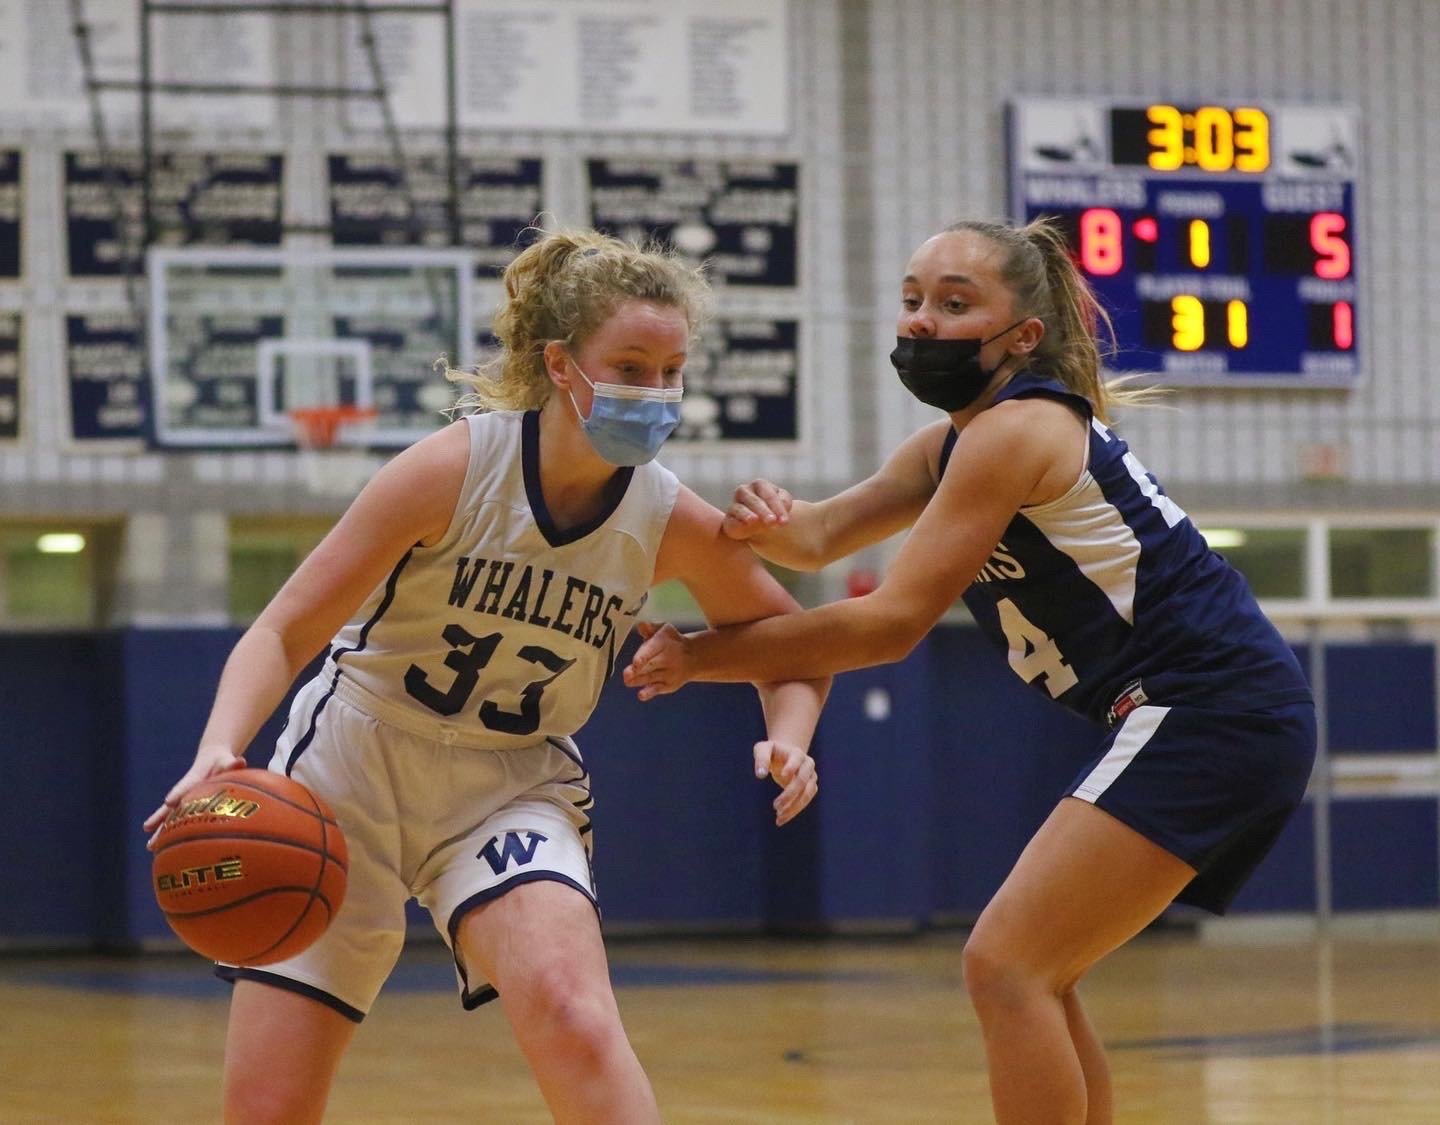 Senior captain Maclaine Willett had 15 points on the game, a team high for Nantucket.